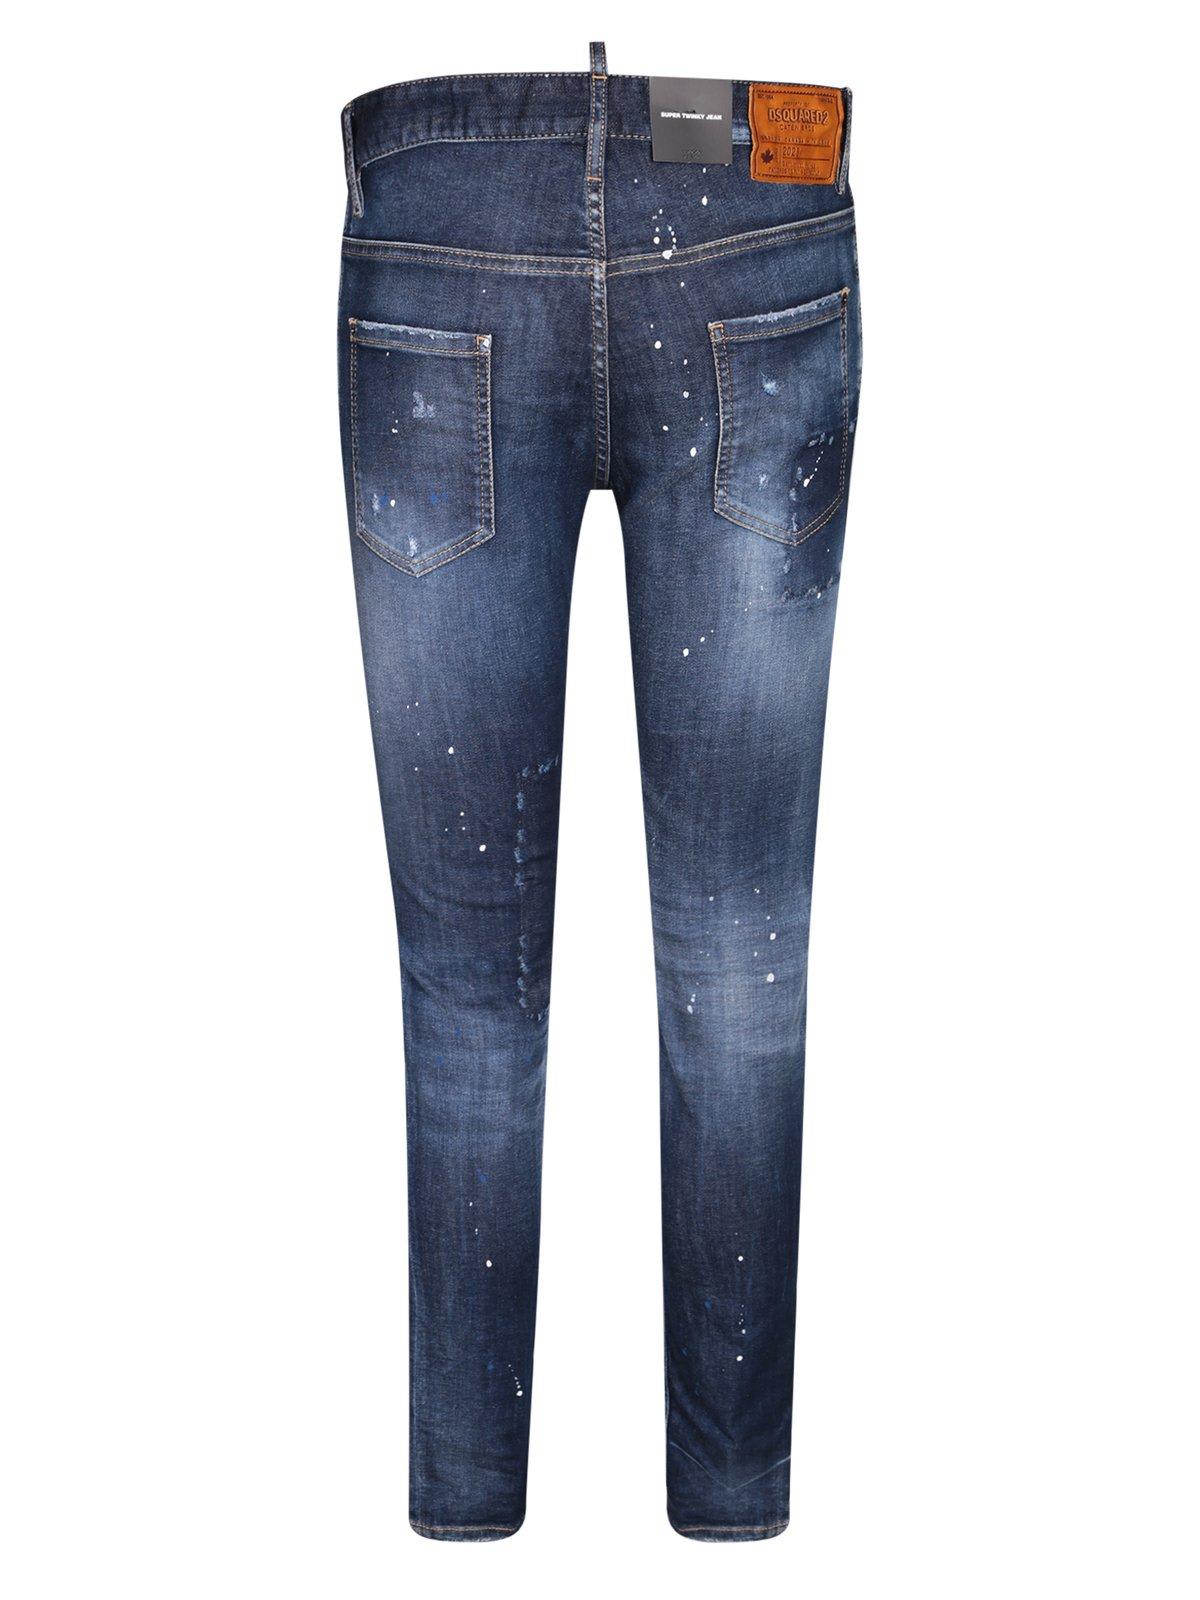 Ripped Wash Super Twinky Jeans In Navy Blue